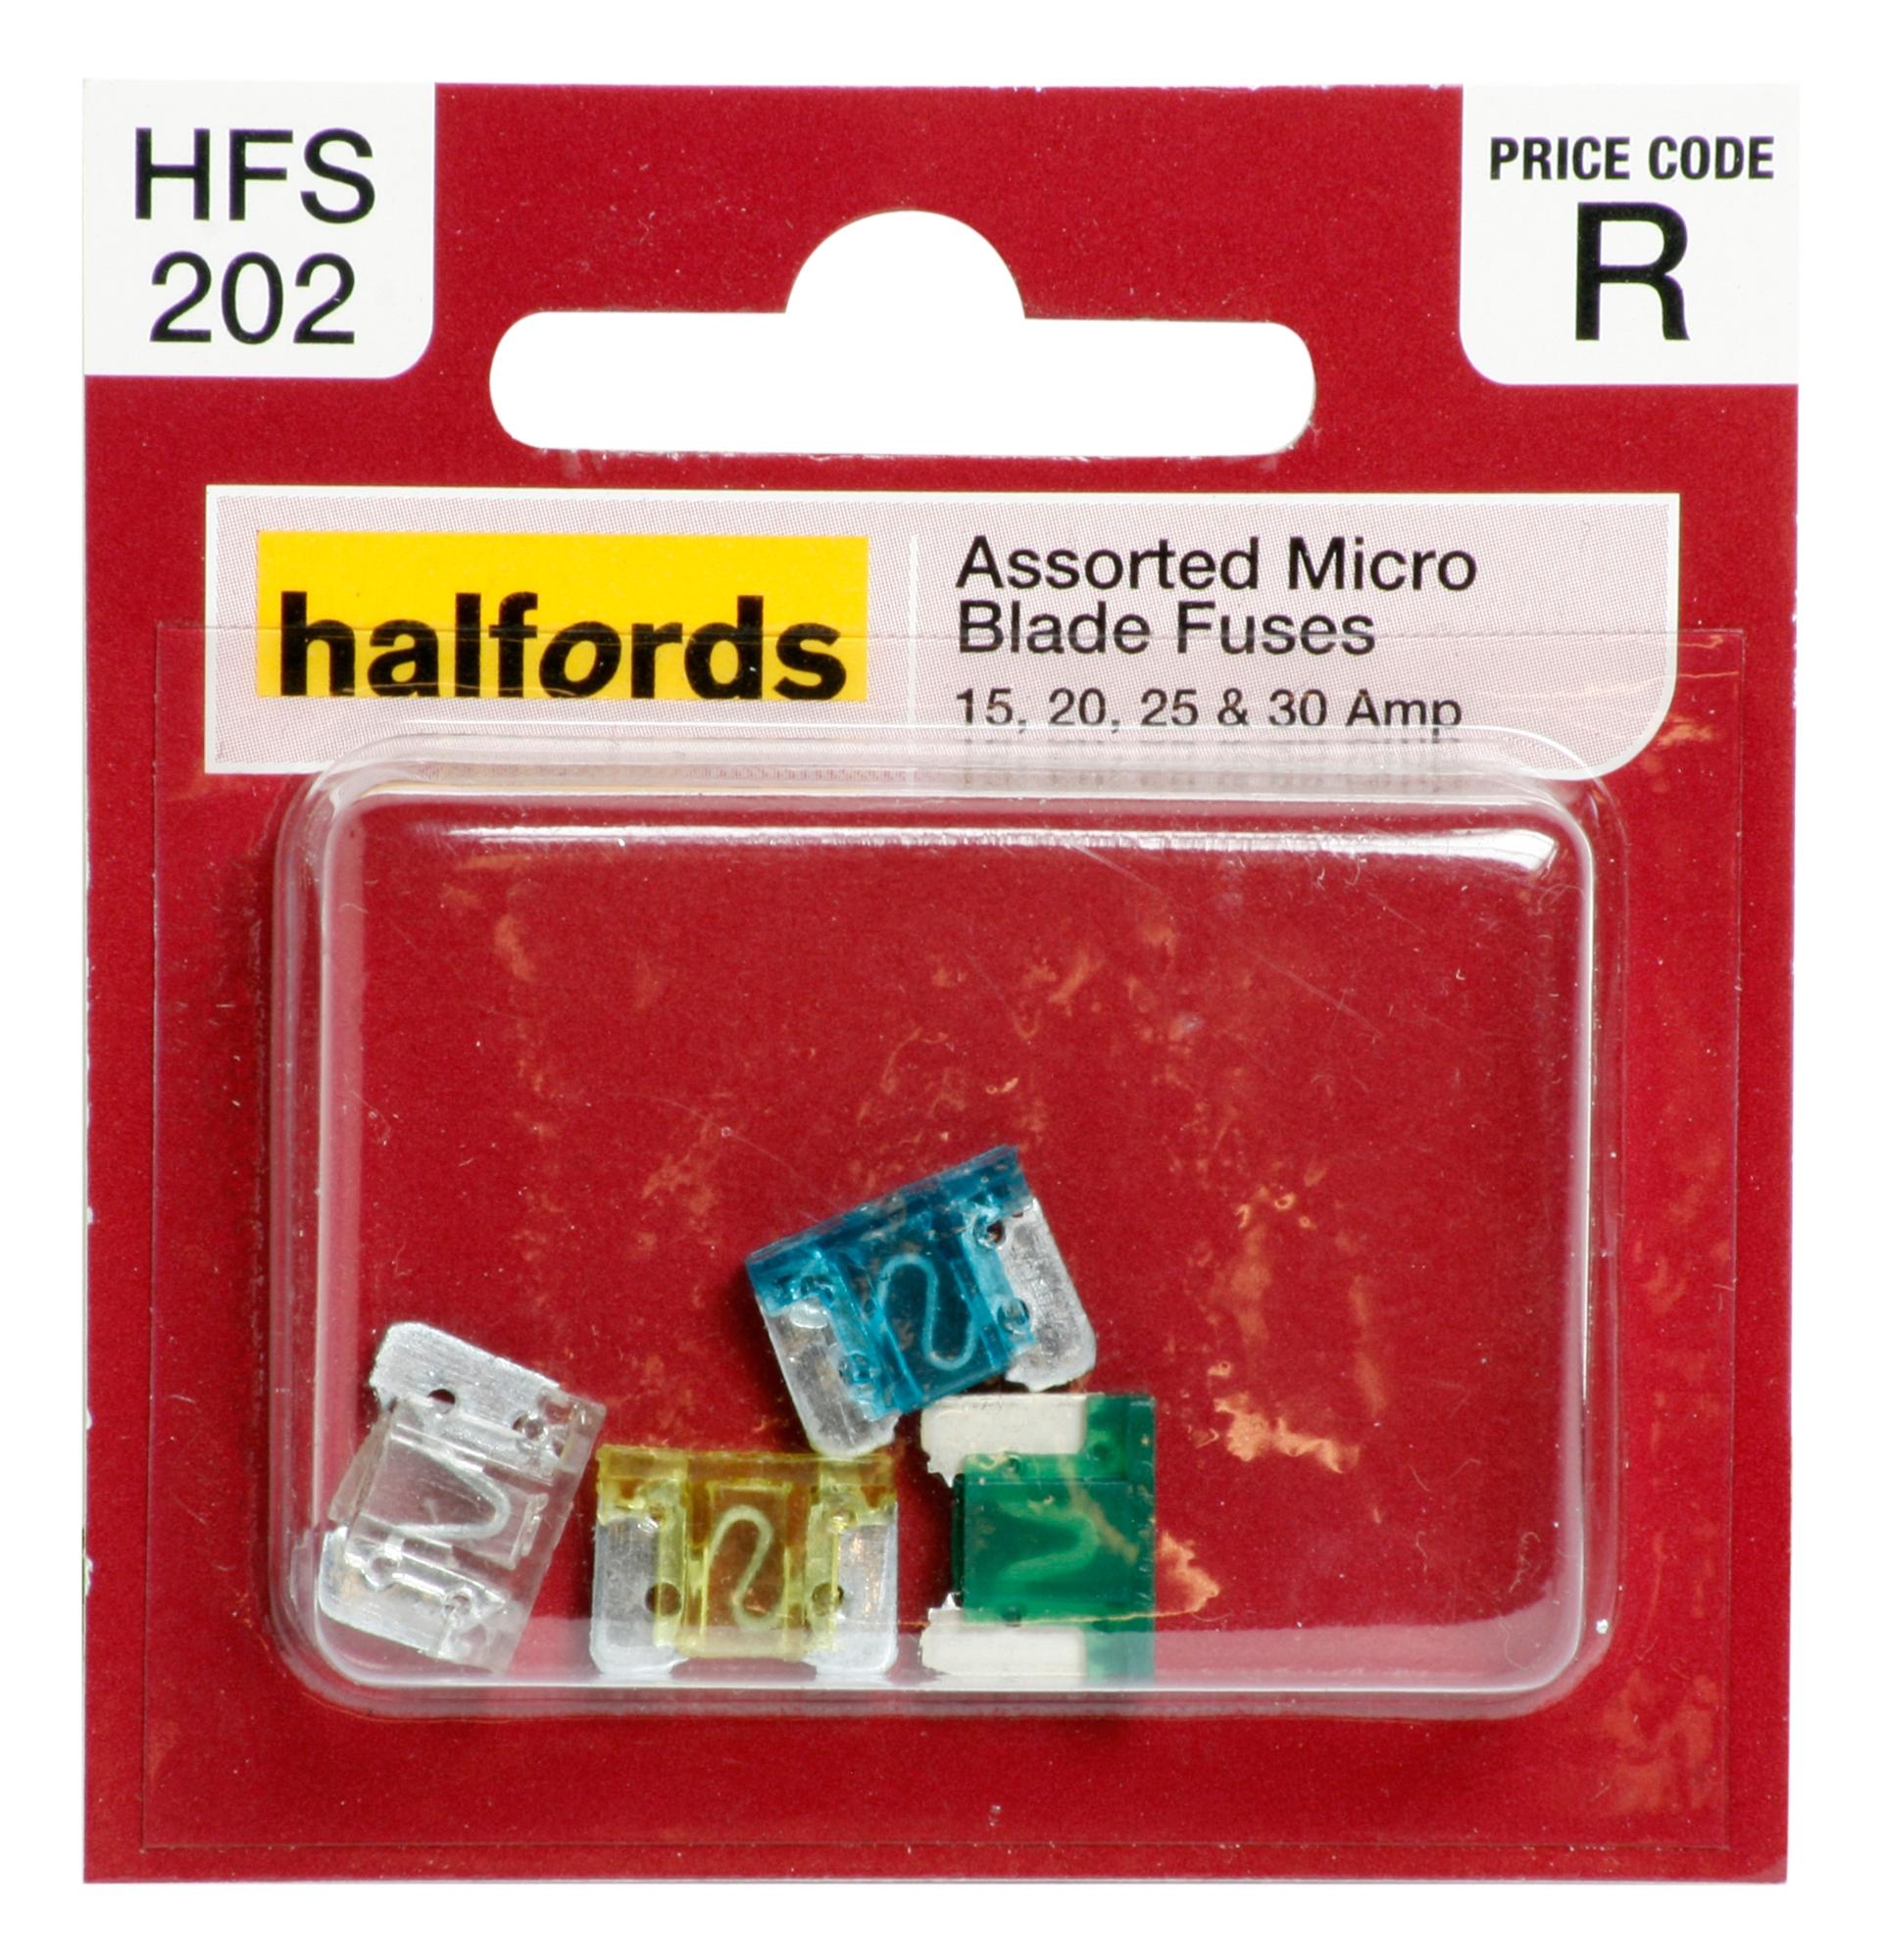 Halfords Assorted Micro Fuses 15/20/25/30 Amp (Hfs202)